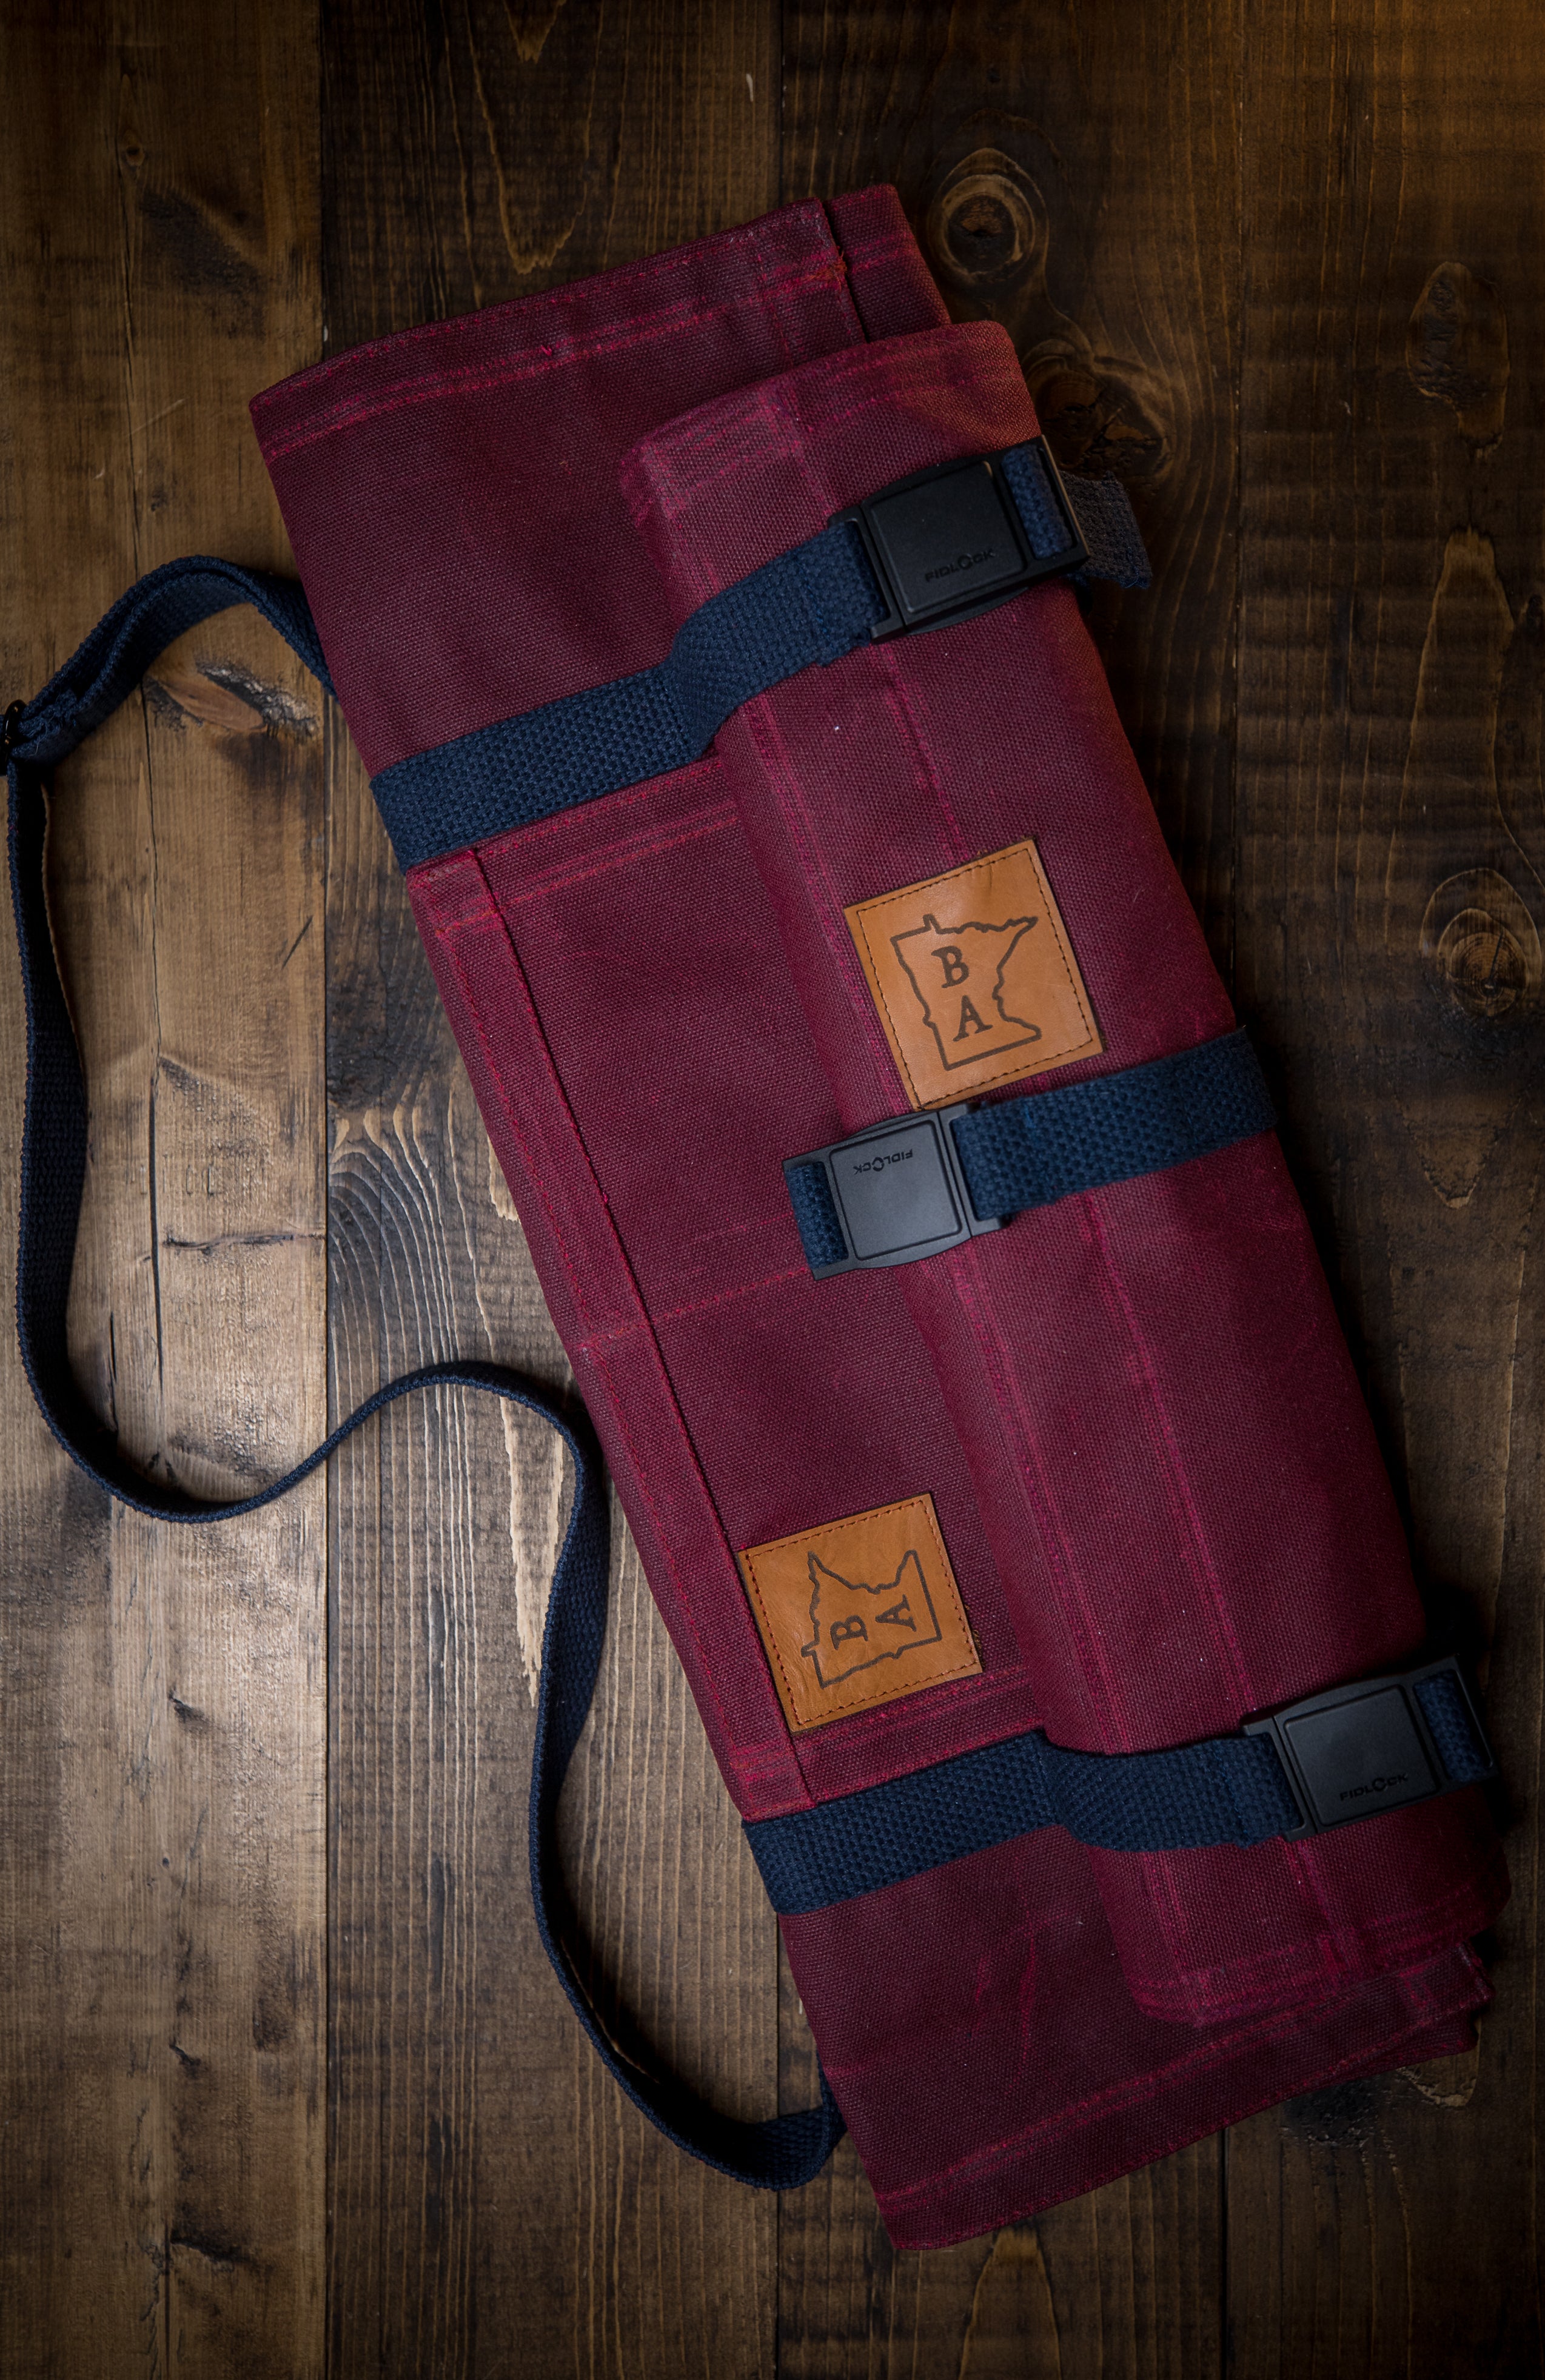 Main Squeeze burgundy cotton knife roll with a tex-wax outer shell canvas displayed on wooden surface. The interior of the knife roll is 50-50 Kevlar/Nomex blend for durability and protection. Shown with the matching set of the Side Hustle knife roll. Both designed by Craftmade Aprons, Minnesota.